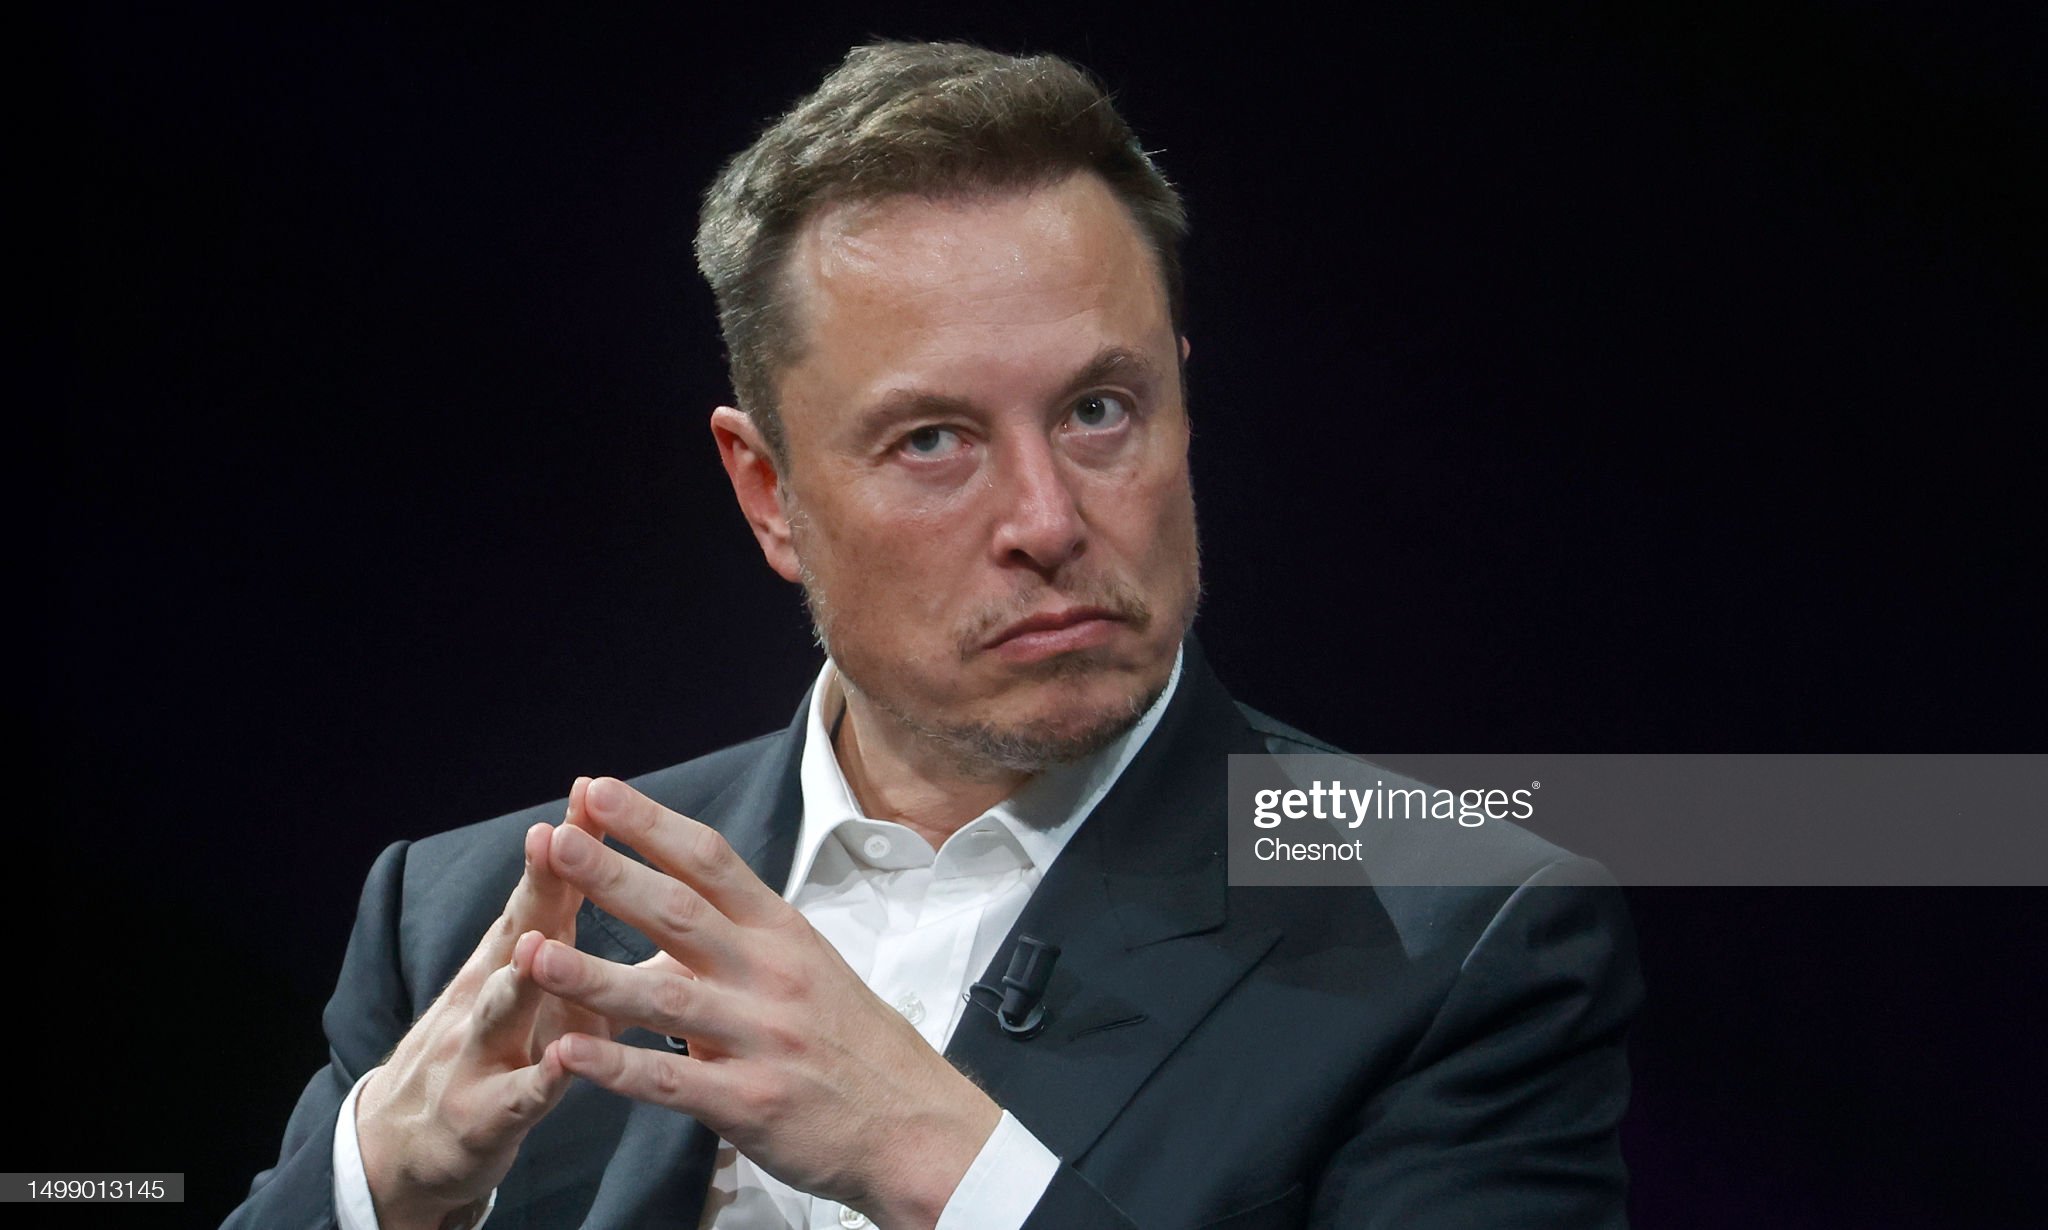 PARIS, FRANCE - JUNE 16: Chief Executive Officer of SpaceX and Tesla and owner of Twitter, Elon Musk attends the Viva Technology conference dedicated to innovation and startups at the Porte de Versailles exhibition centre on June 16, 2023 in Paris, France. Elon Musk is visiting Paris for the VivaTech show where he gives a conference in front of 4,000 technology enthusiasts. He also took the opportunity to meet Bernard Arnaud, CEO of LVMH and the French President. Emmanuel Macron, who has already met Elon Musk twice in recent months, hopes to convince him to set up a Tesla battery factory in France, his pioneer company in electric cars. (Photo by Chesnot/Getty Images)